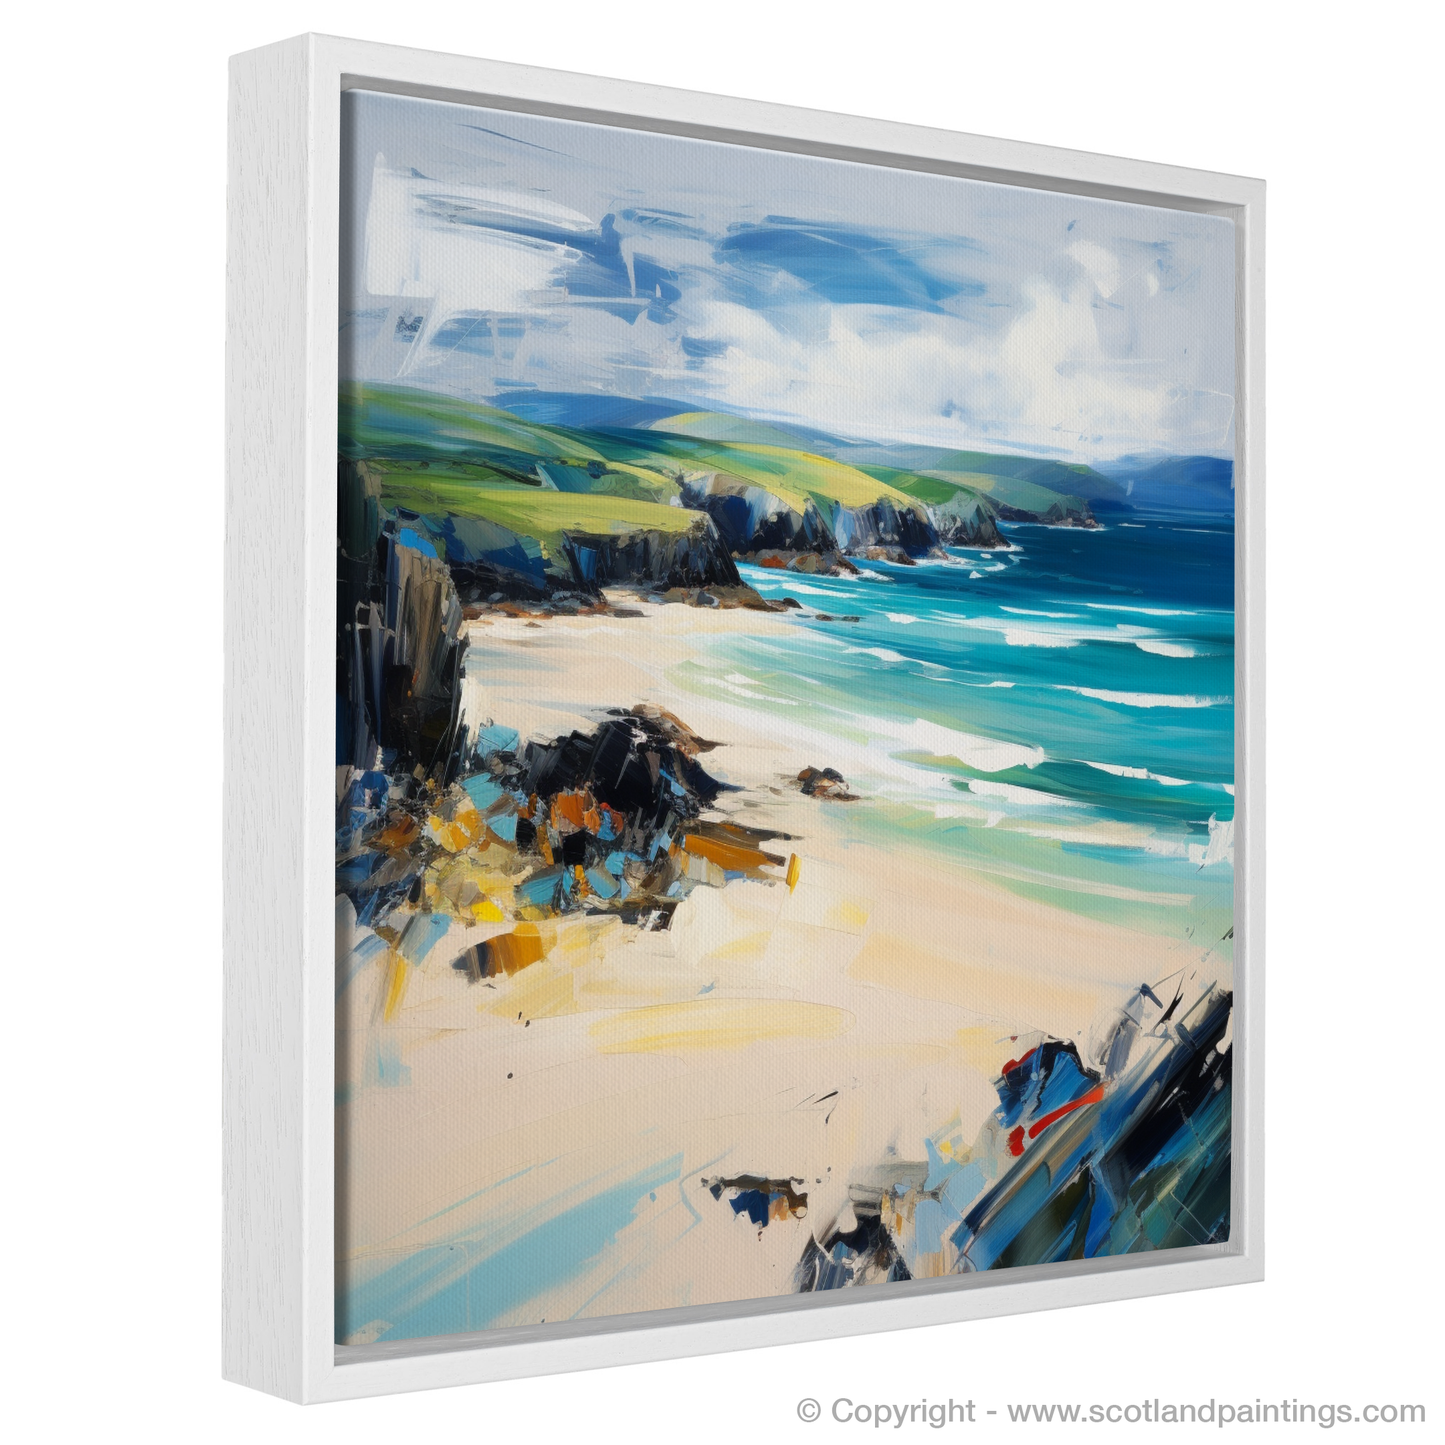 Painting and Art Print of Durness Beach, Sutherland entitled "Durness Beach: An Expressionist Journey through Scotland's Wild Coastline".